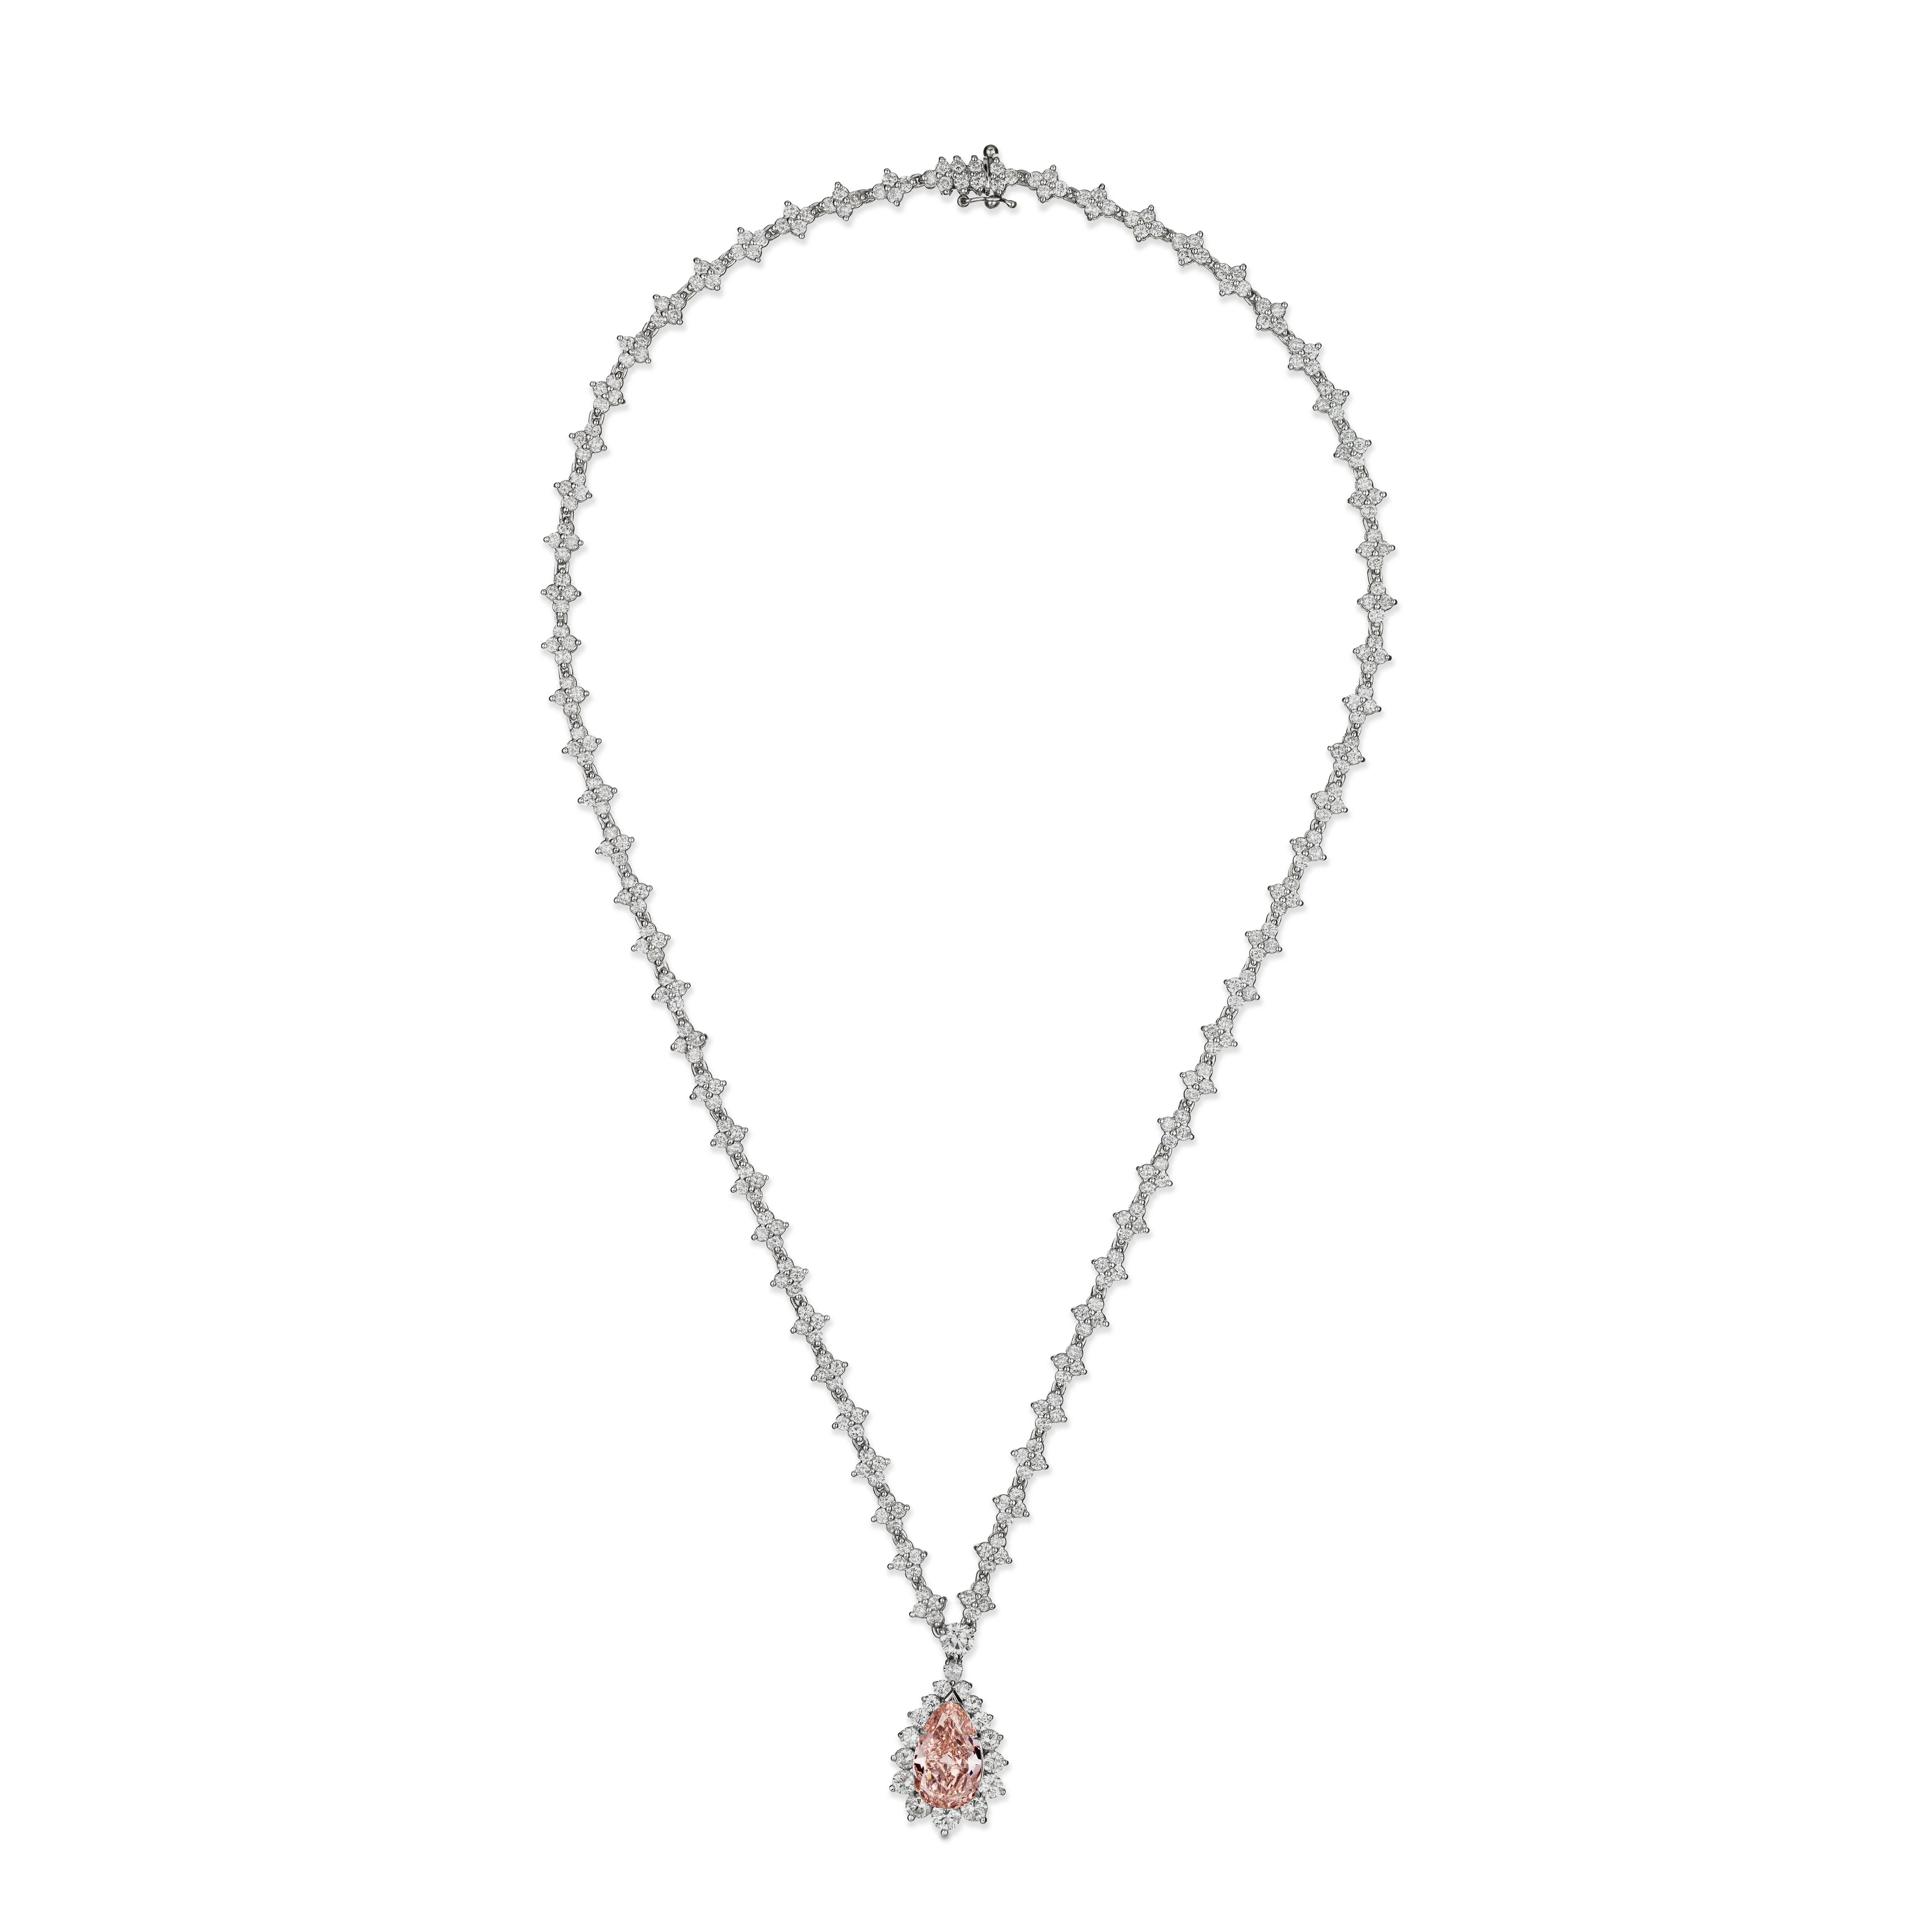 We are pleased to offer this Large & Rare Ladies Platinum & GIA Certified Fancy Orangy Pink Diamond Necklace. This stunning necklace features 15.10ctw natural fancy and white colored diamonds, including a breathtaking 4.45ct GIA certified